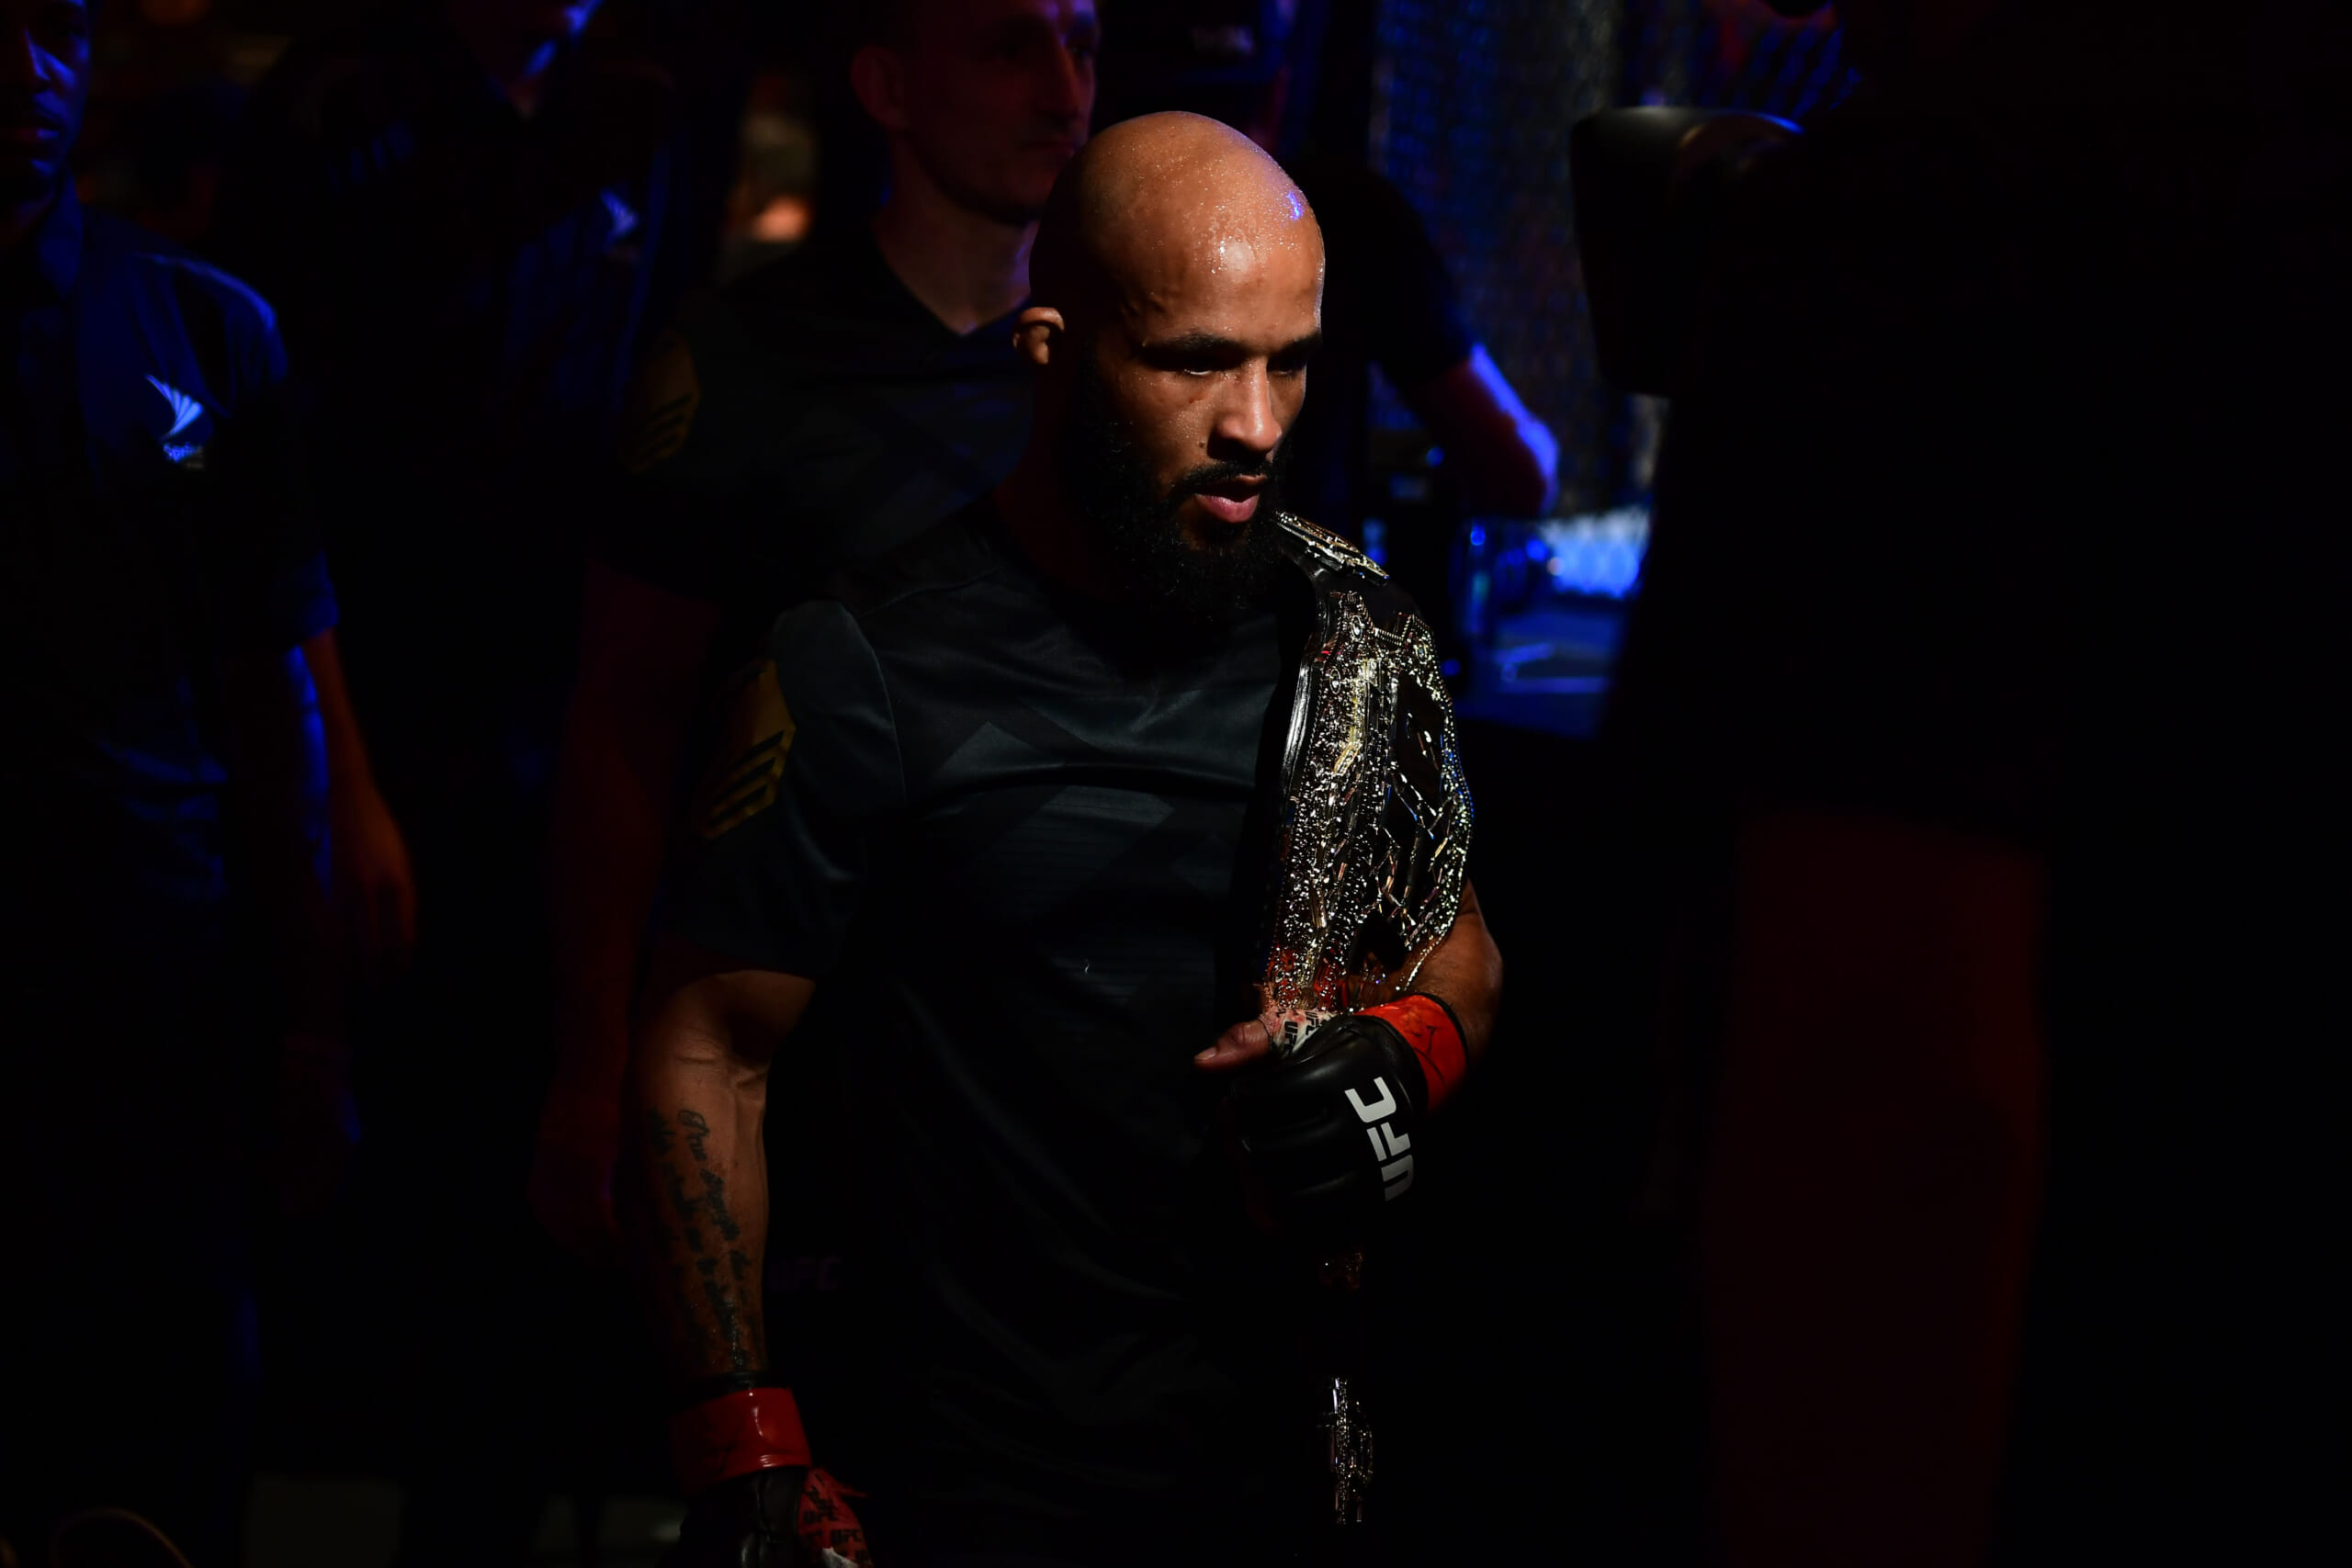 Will Demetrious Johnson hang it up after winning at ONE Fight Night 10?